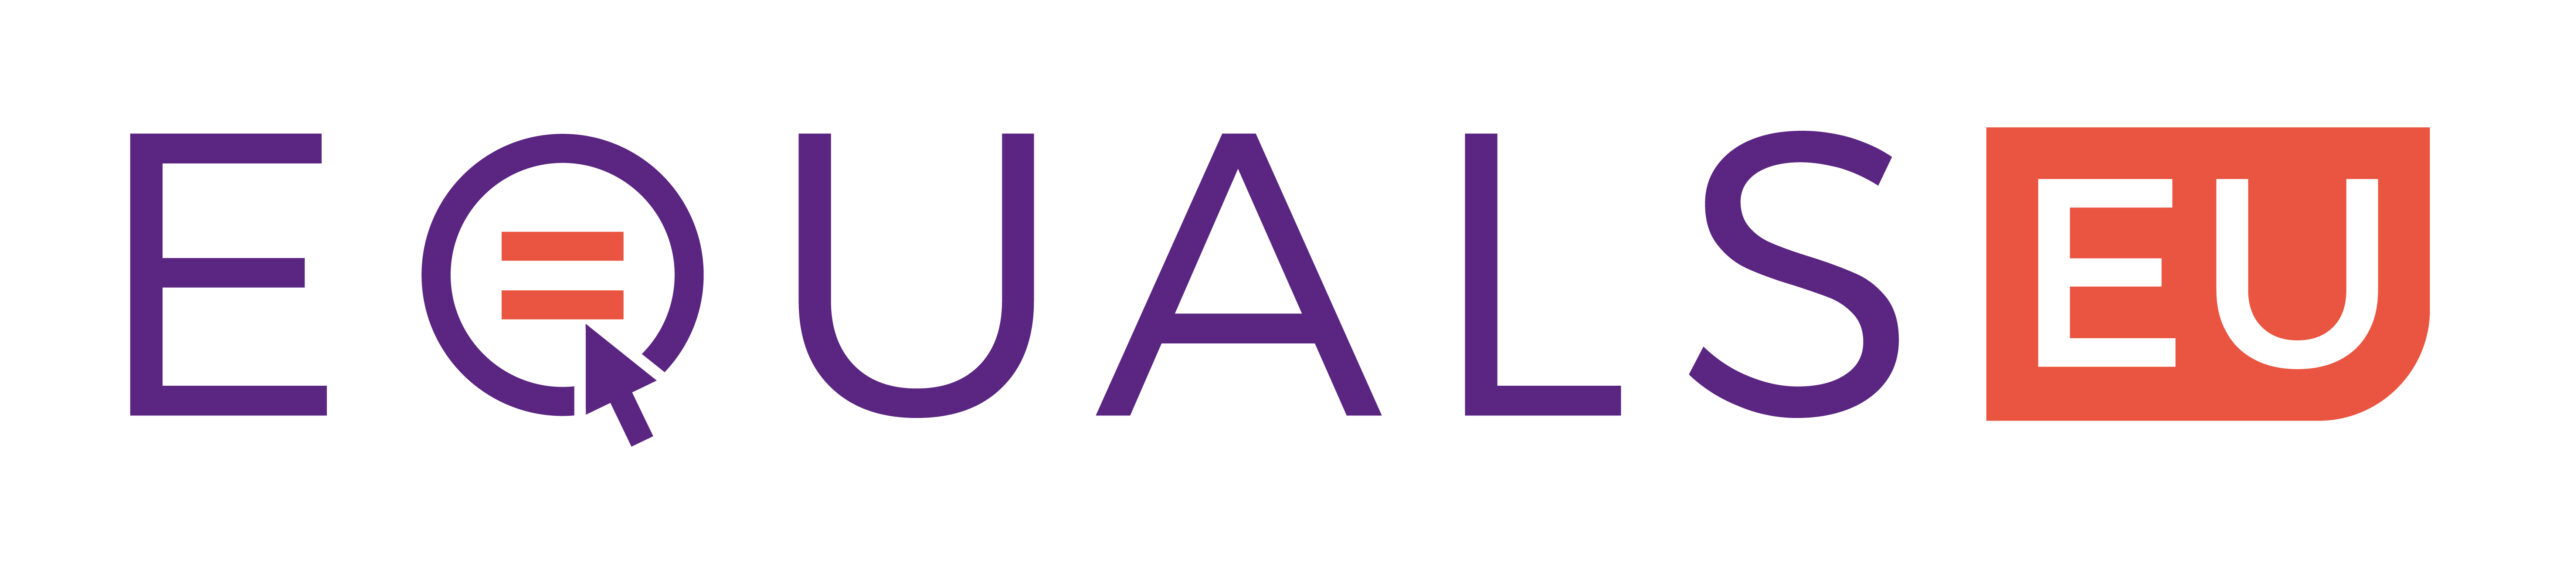 EQUALS EU logo: Equals text in purple, the q is formed of an o with an equals sign inside it, an arrow is about to click it to form the letter q. EU written in white in an orange box